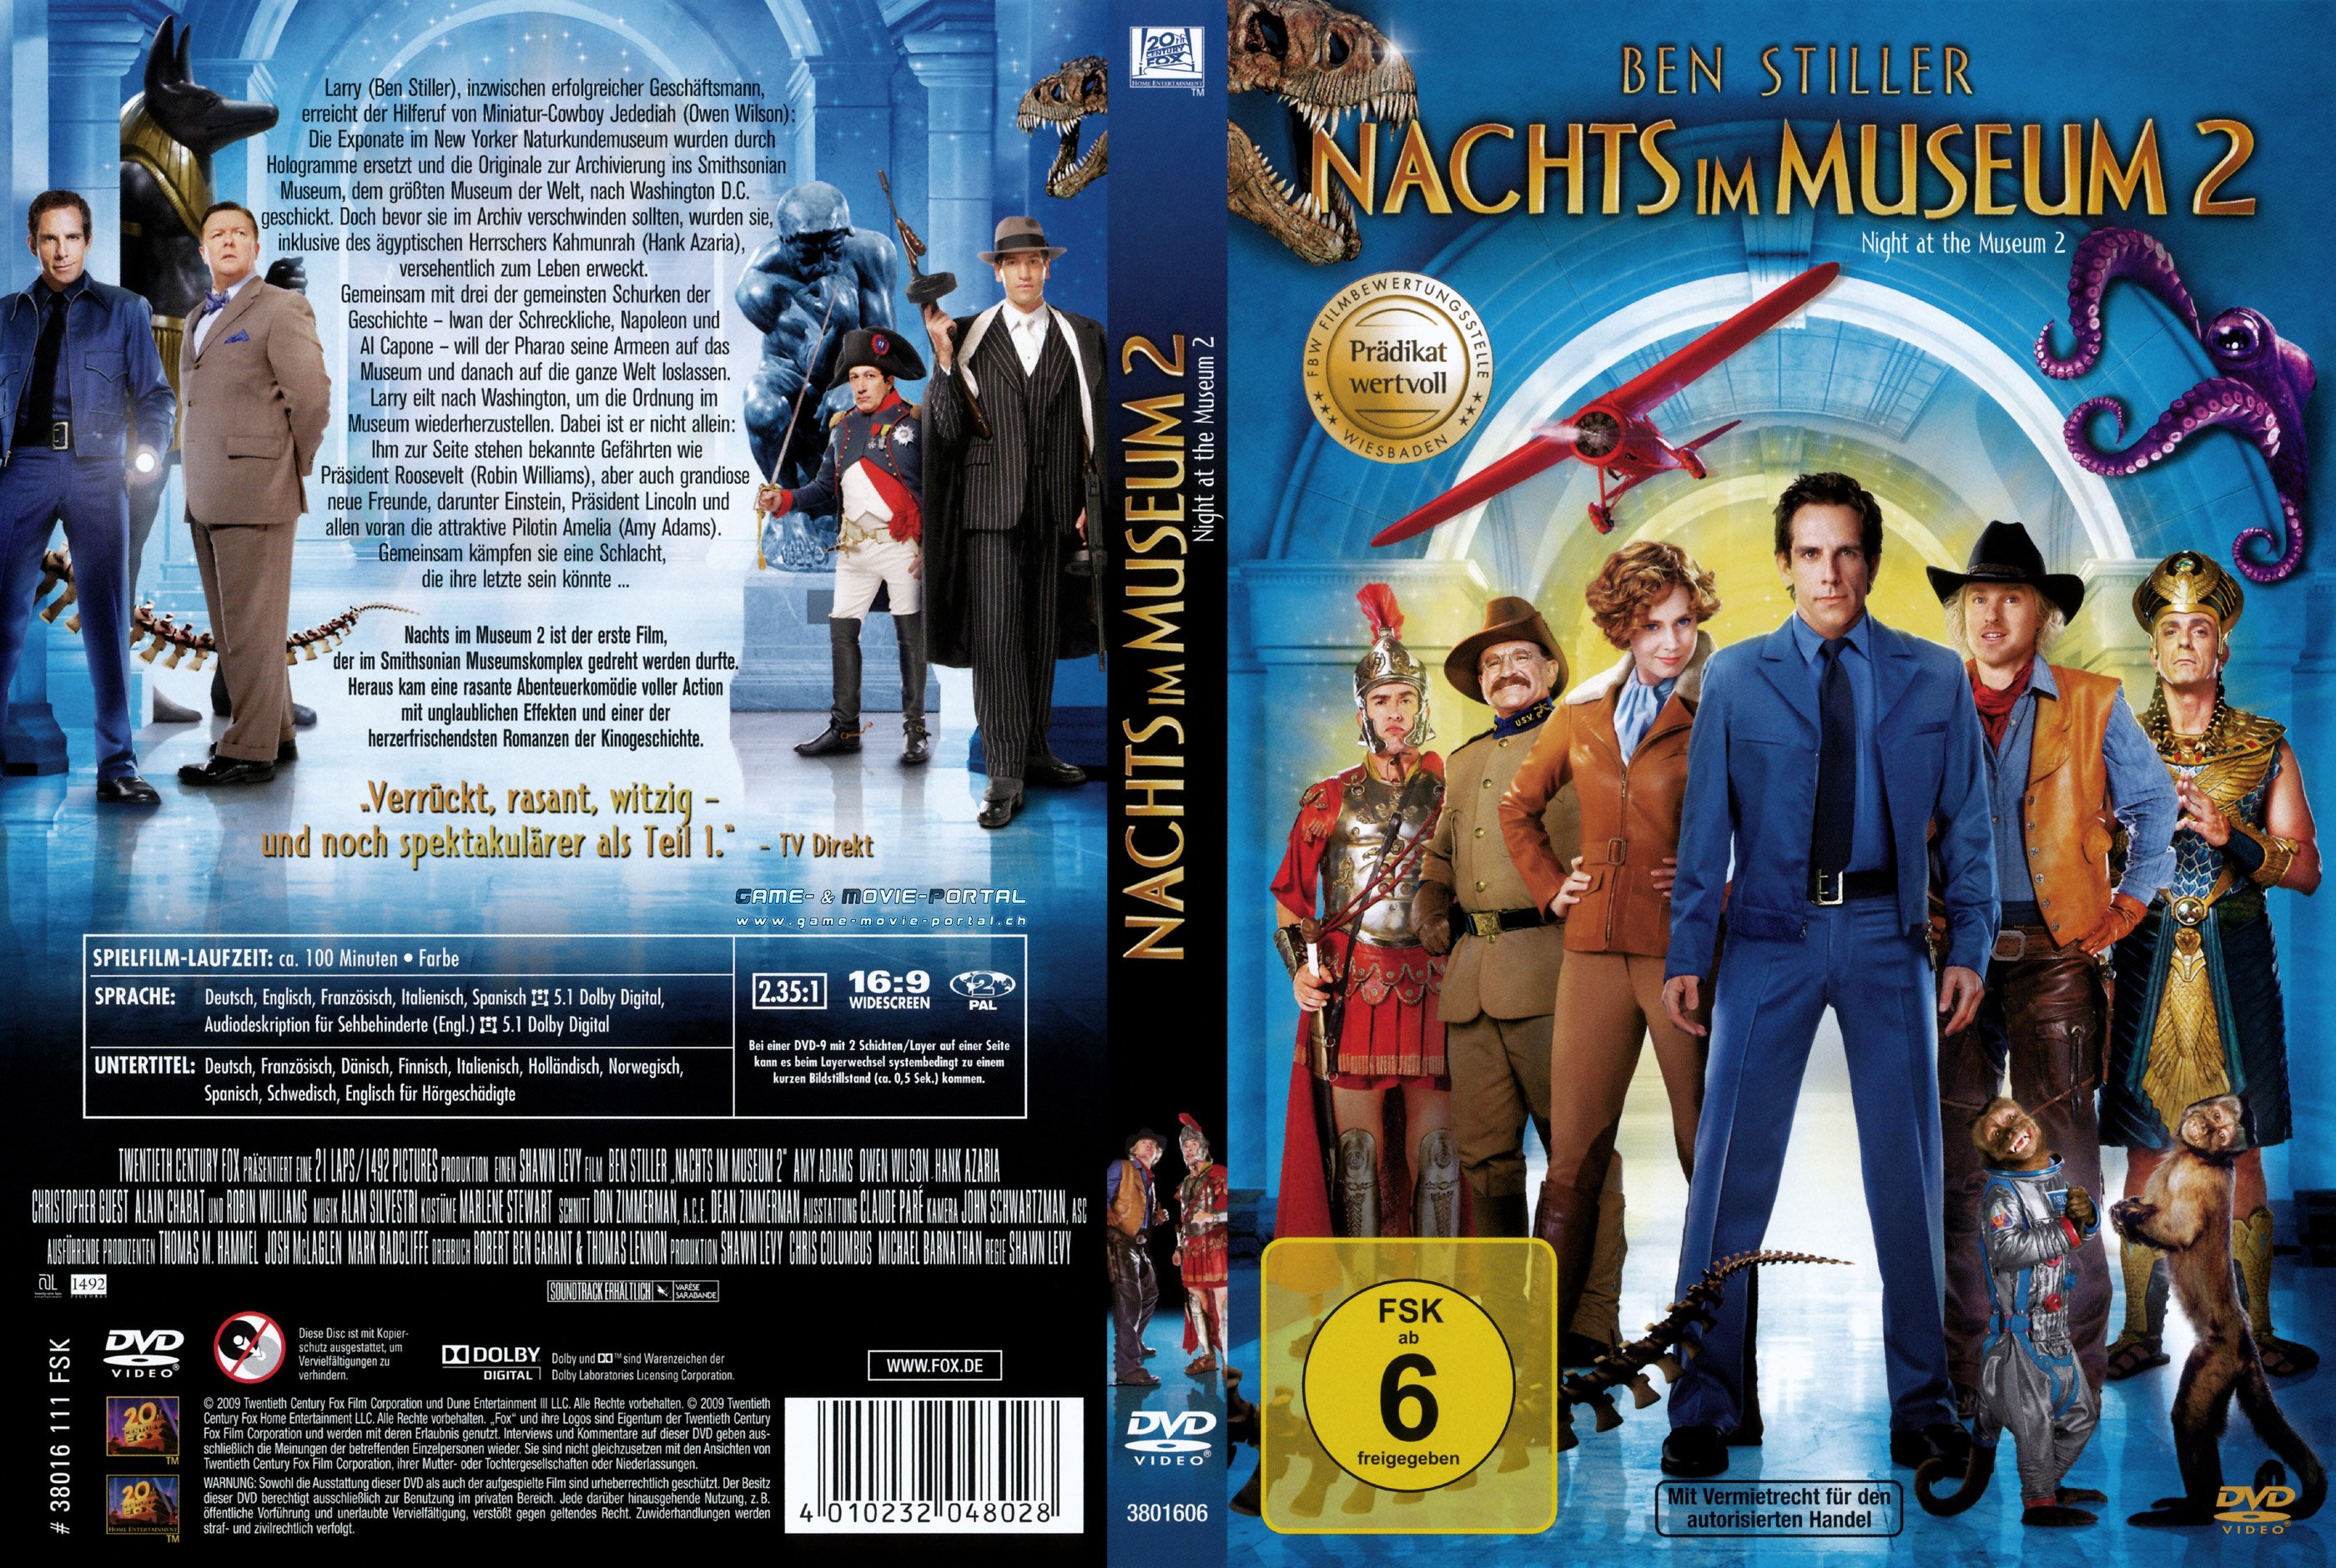 dvd case covers